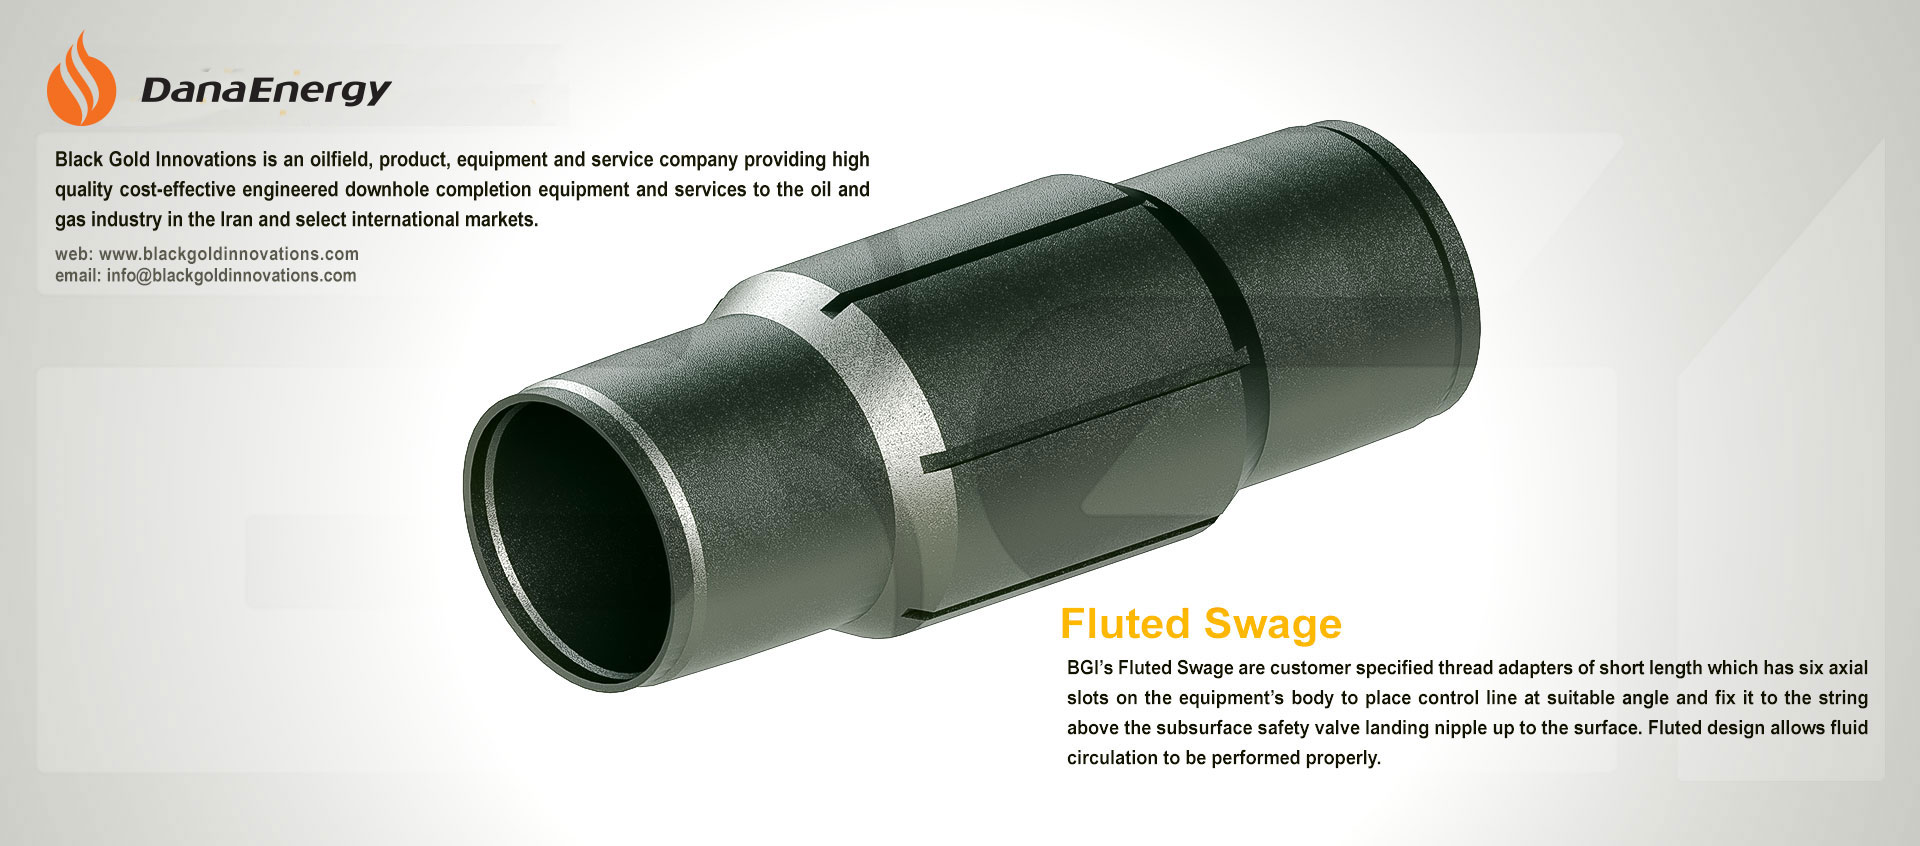 Fluted Swage